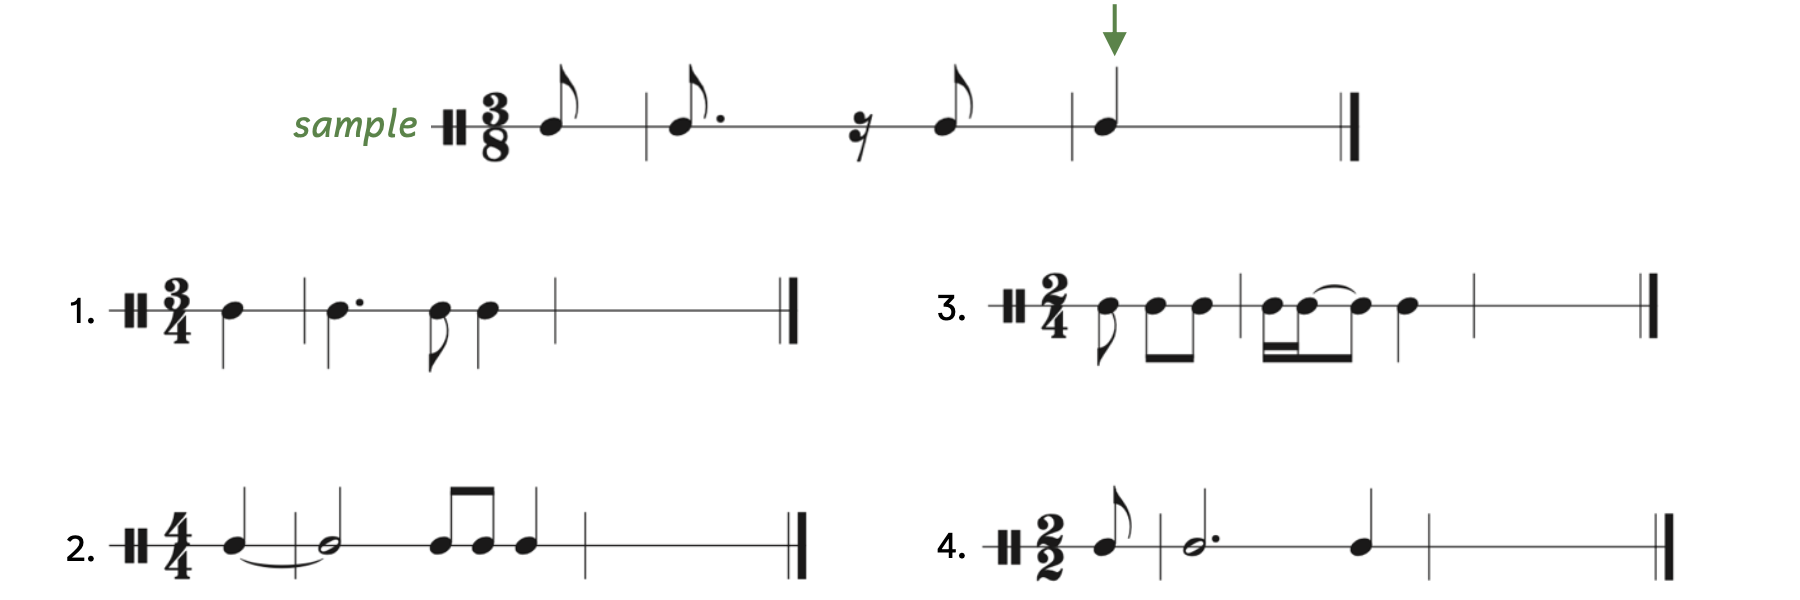 The sample is in 3-8. It shows that a quarter note has been added in the last measure because the anacrusis is an eighth rest. Number 1 is in 3-4 and begins with a quarter note anacrusis. Number 2 is in 4-4 and begins with a quarter note anacrusis. Number 3 is in 2-4 and begins with an anacrusis of three eighth notes. Number 4 is in 2-2 and begins with an eighth note anacrusis.